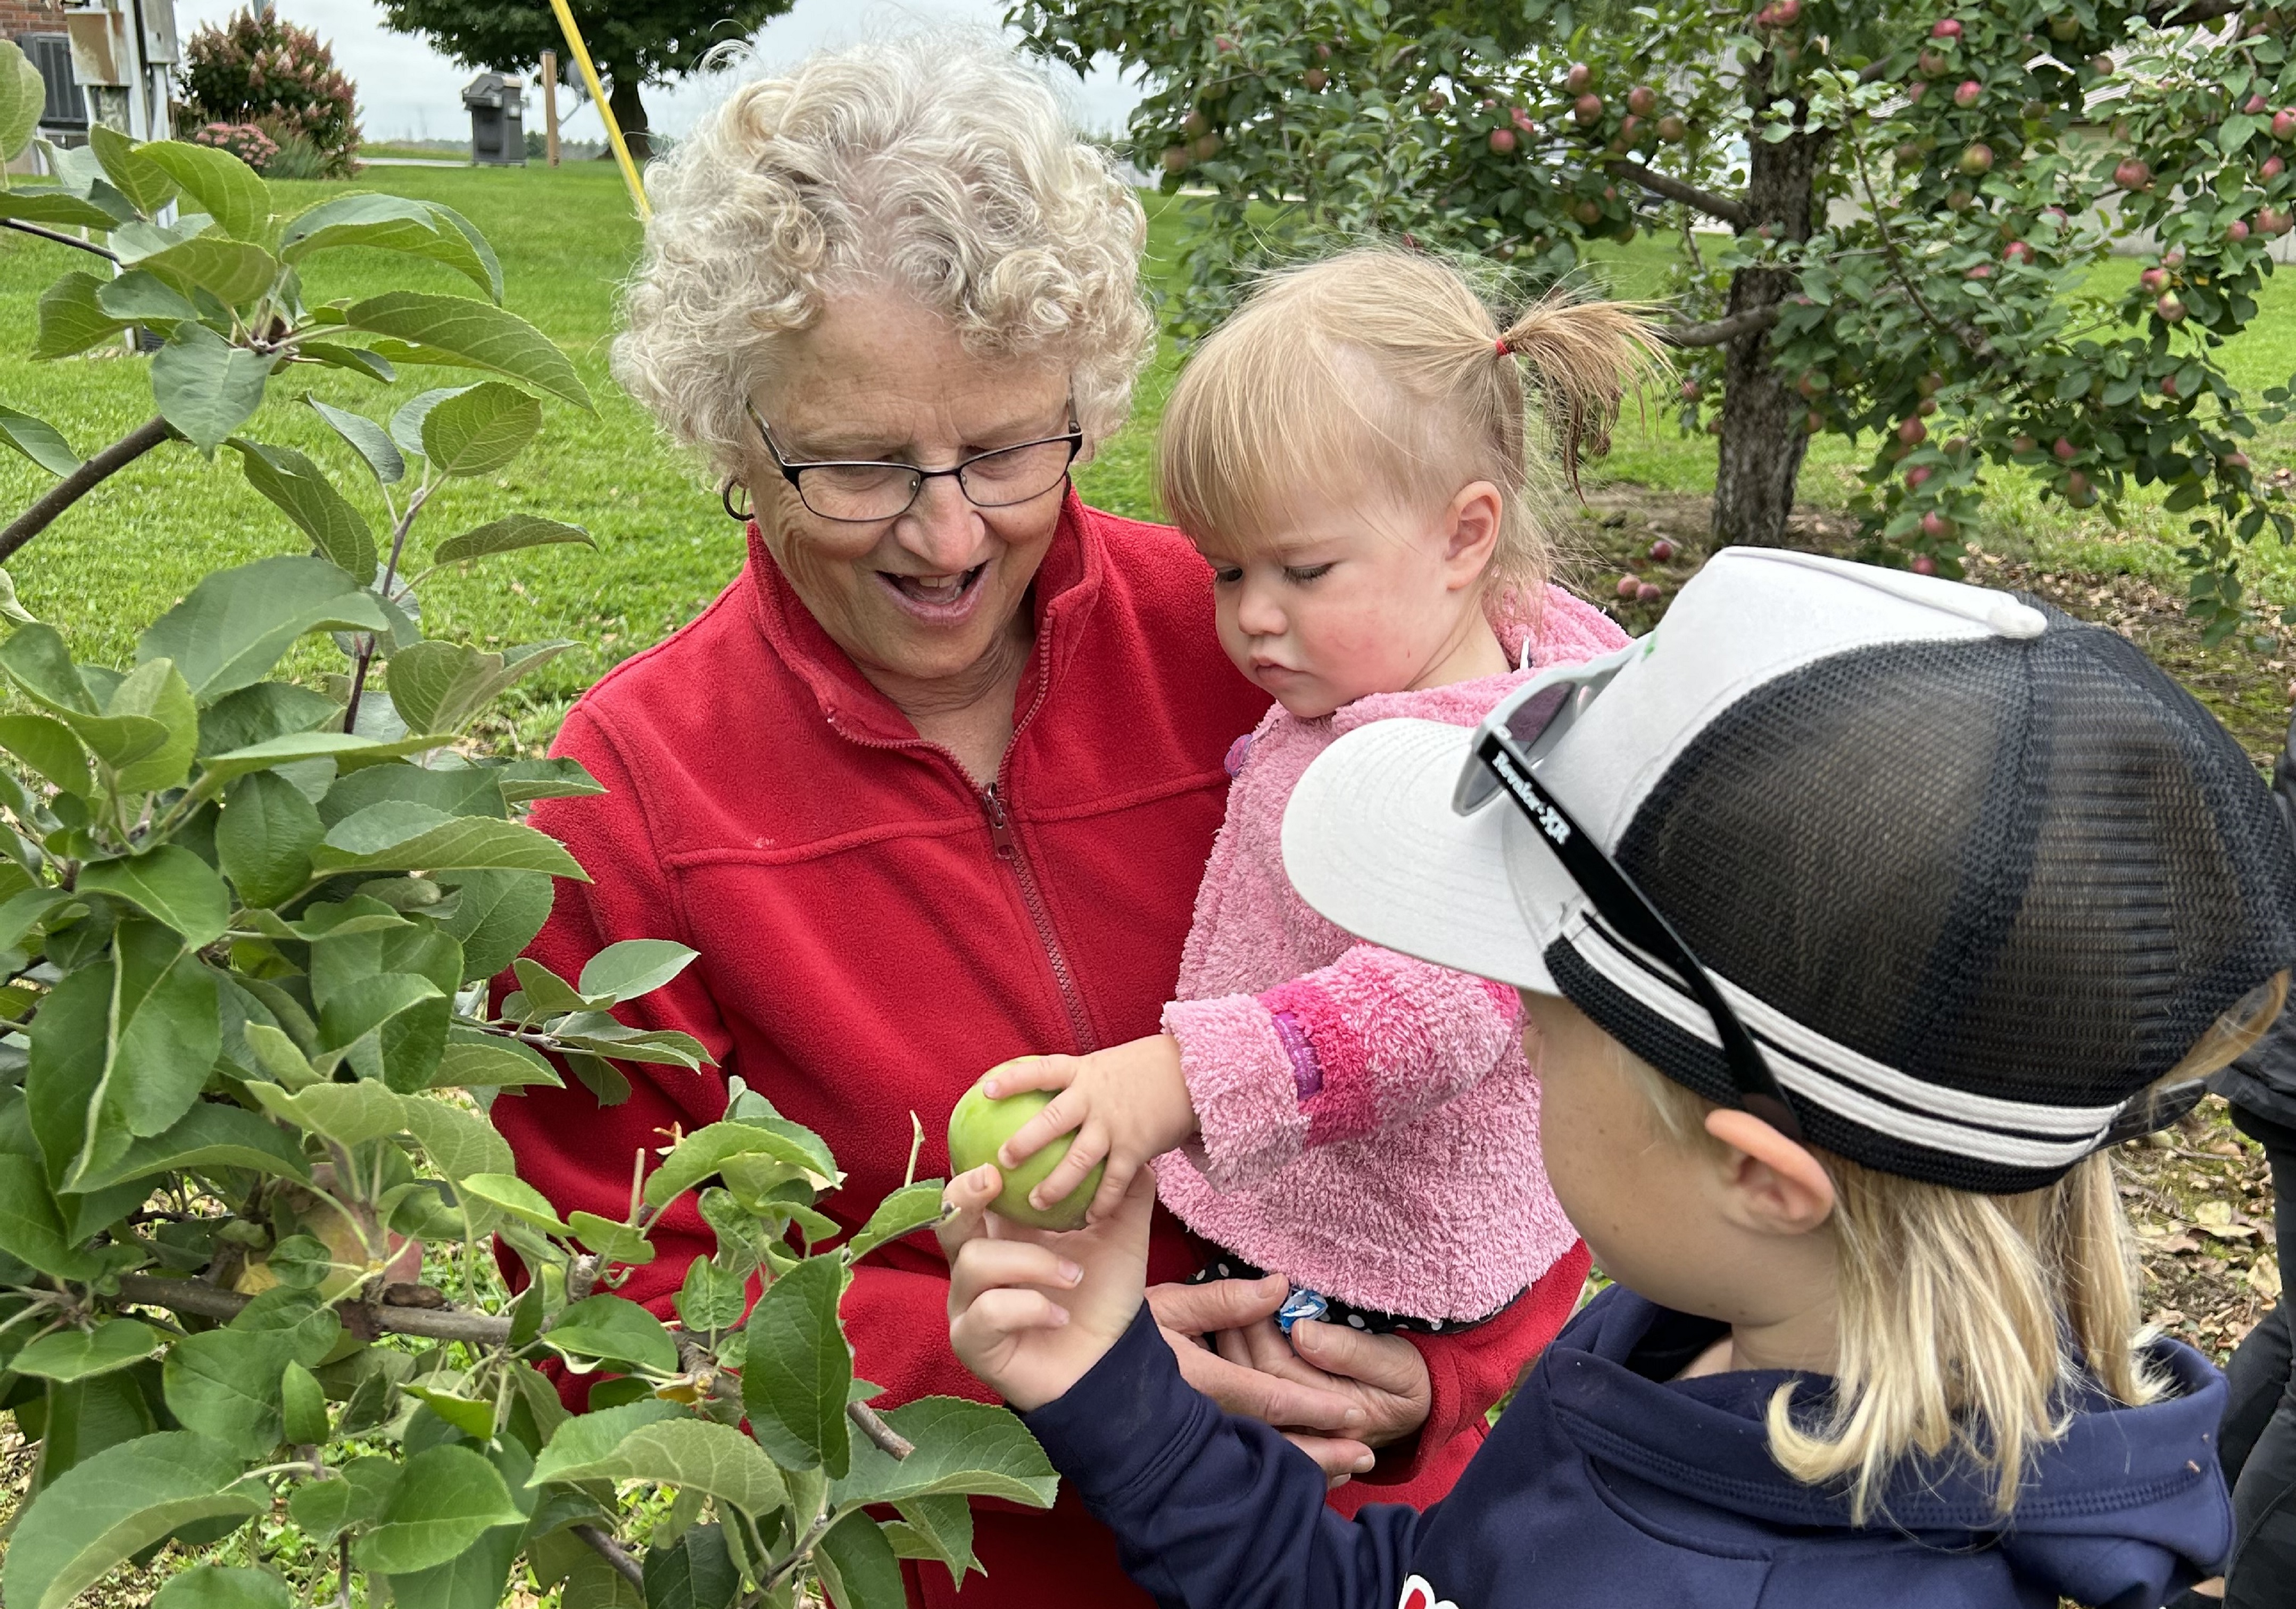 A picture of a grandma with her very young granddaughter and pre-teenaged grandson picking apples.